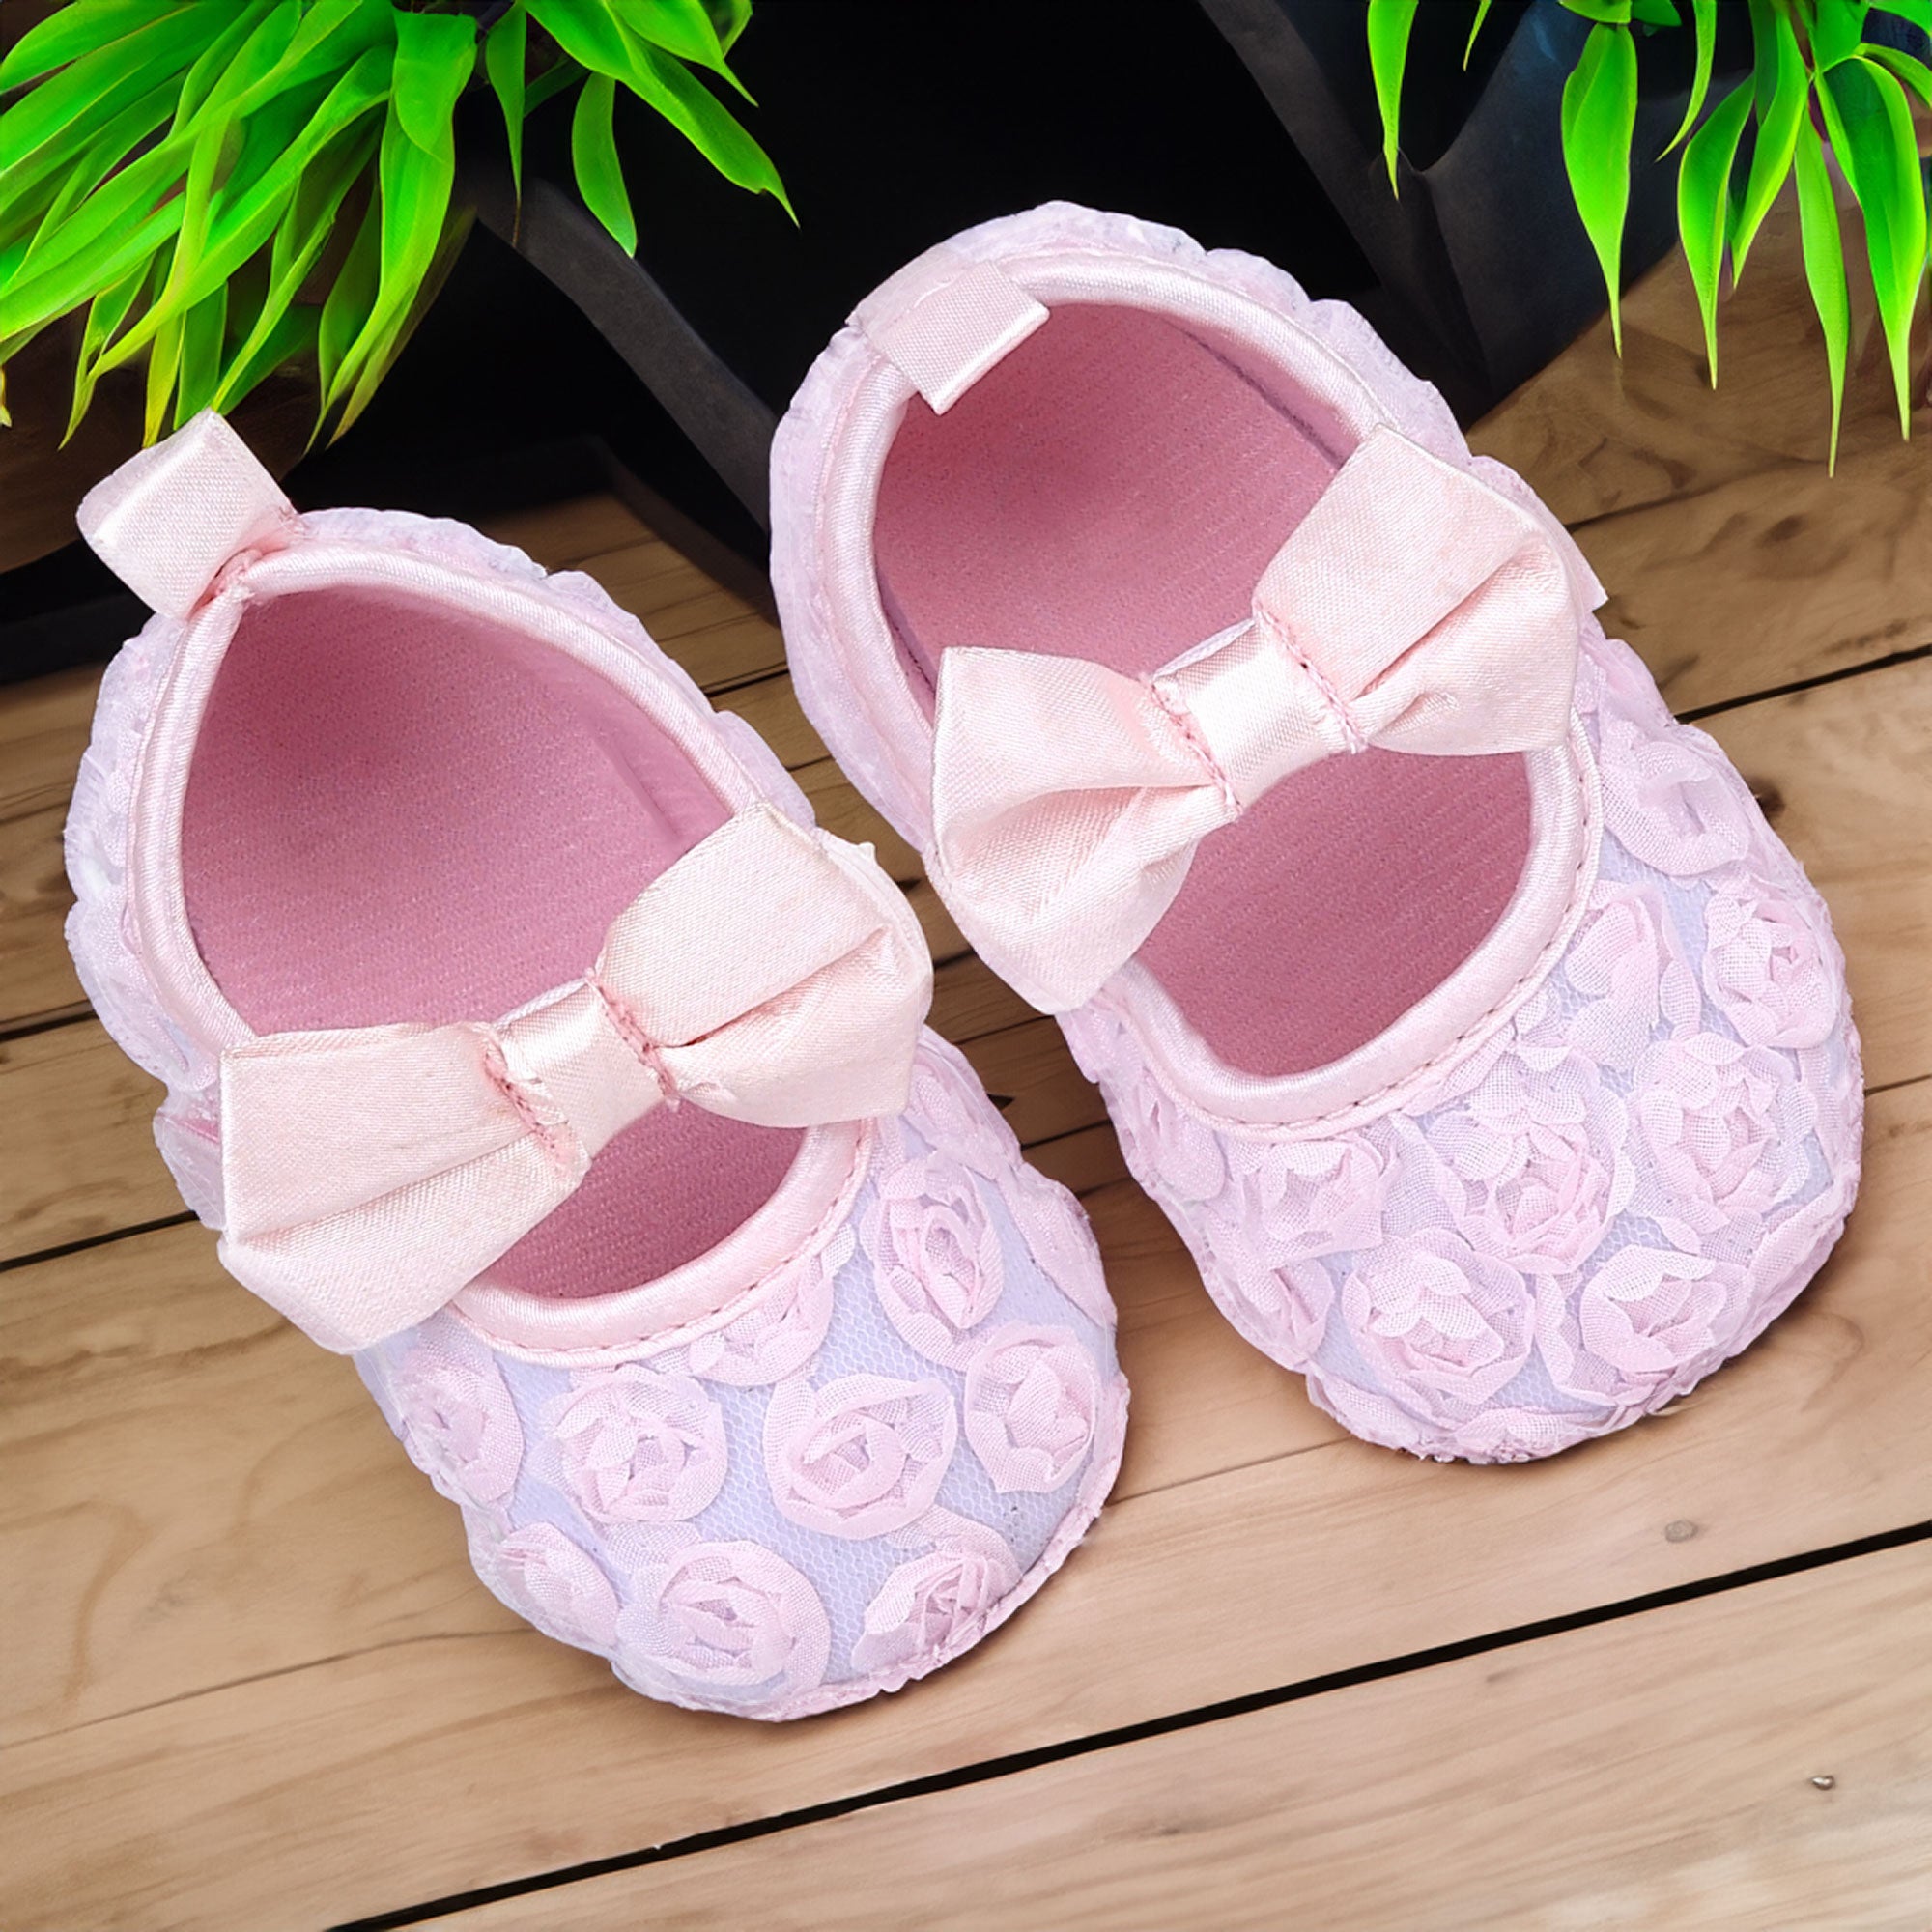 Baby Moo Big Bow Floral Lace Elastic Strap Ballerina Booties - Pink